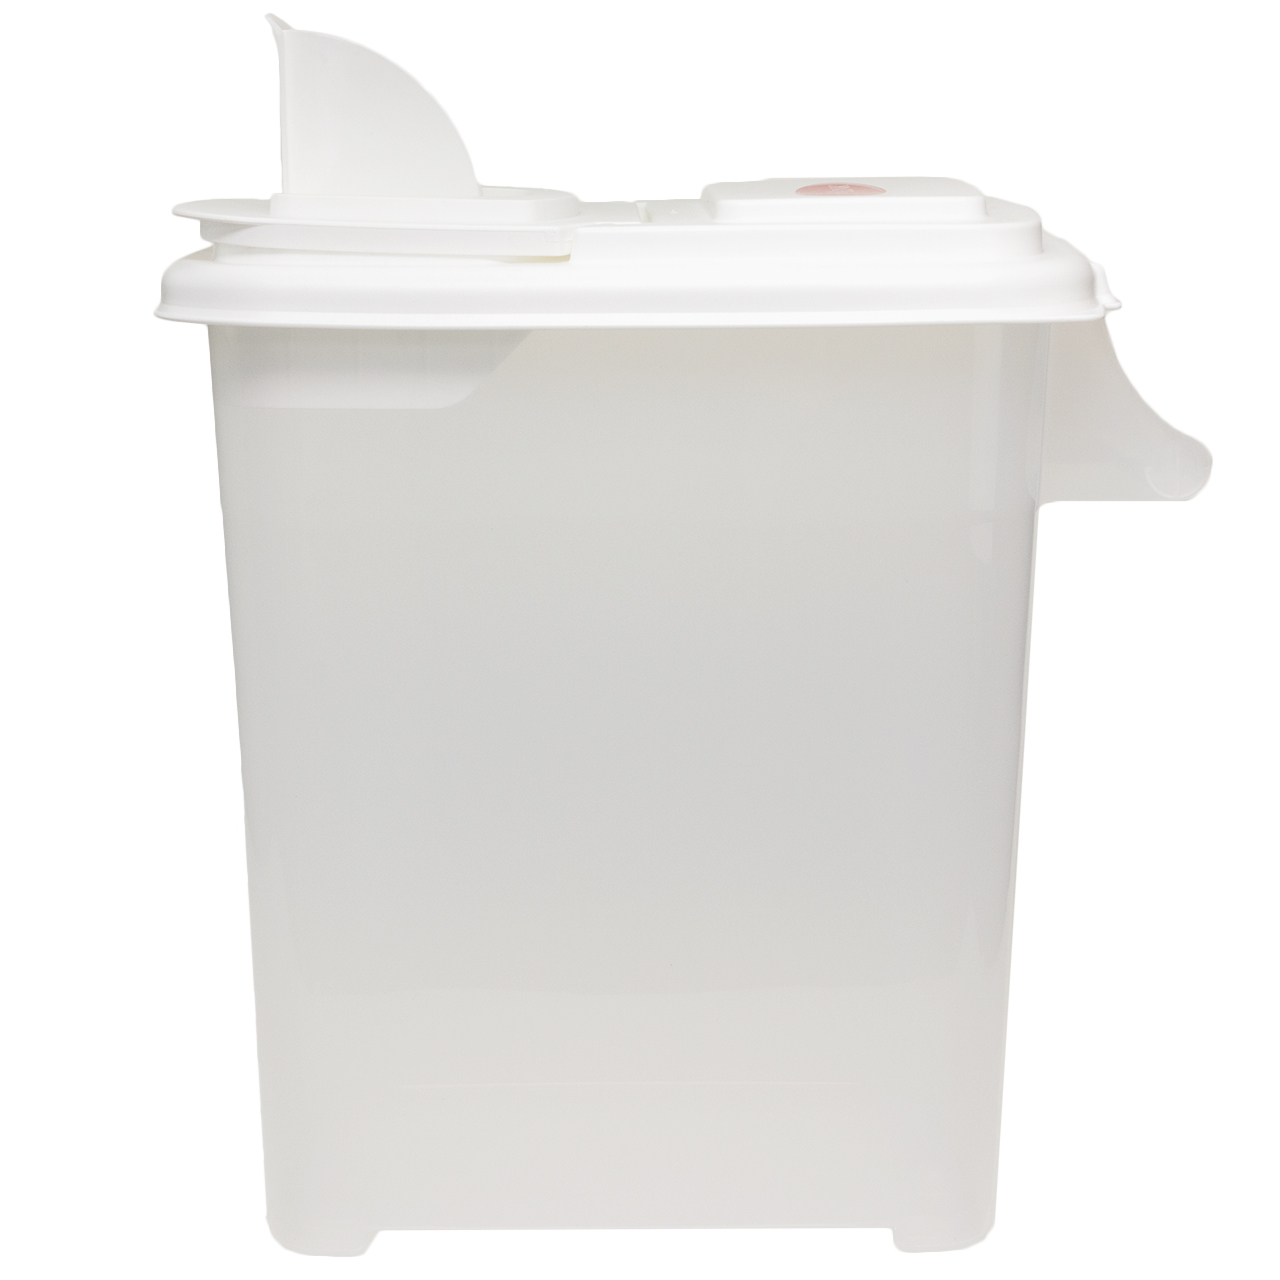 Woodlink 32 Container for Bird Food